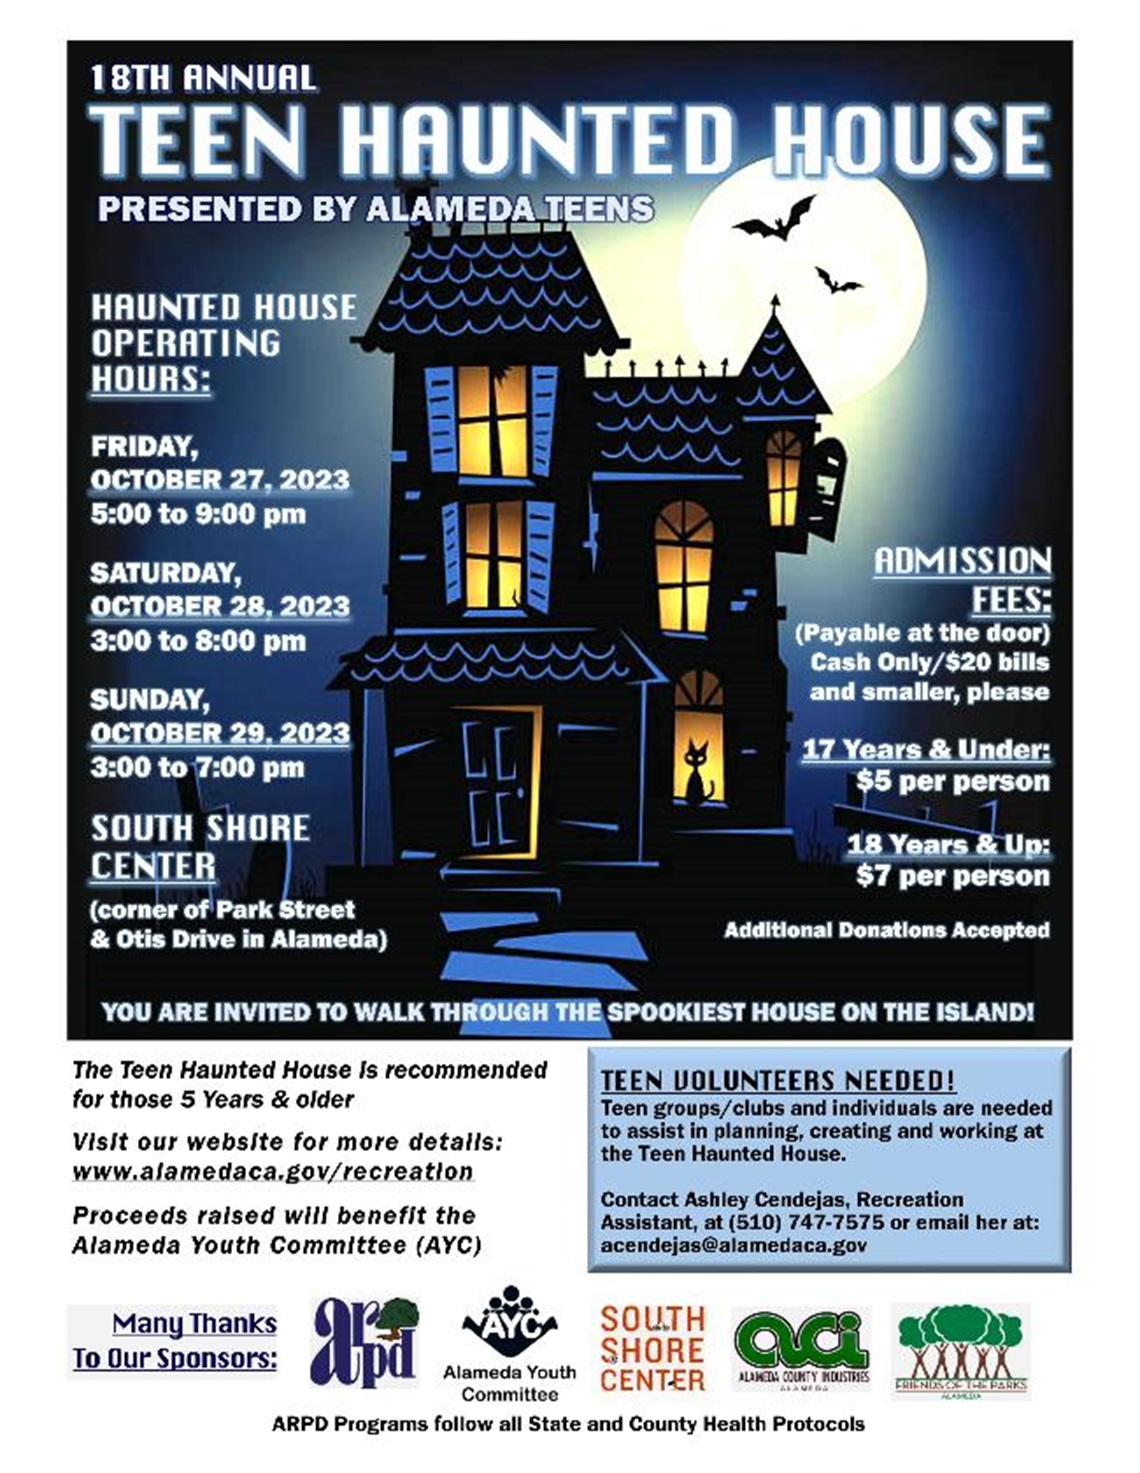 2019 Teen Haunted House Event